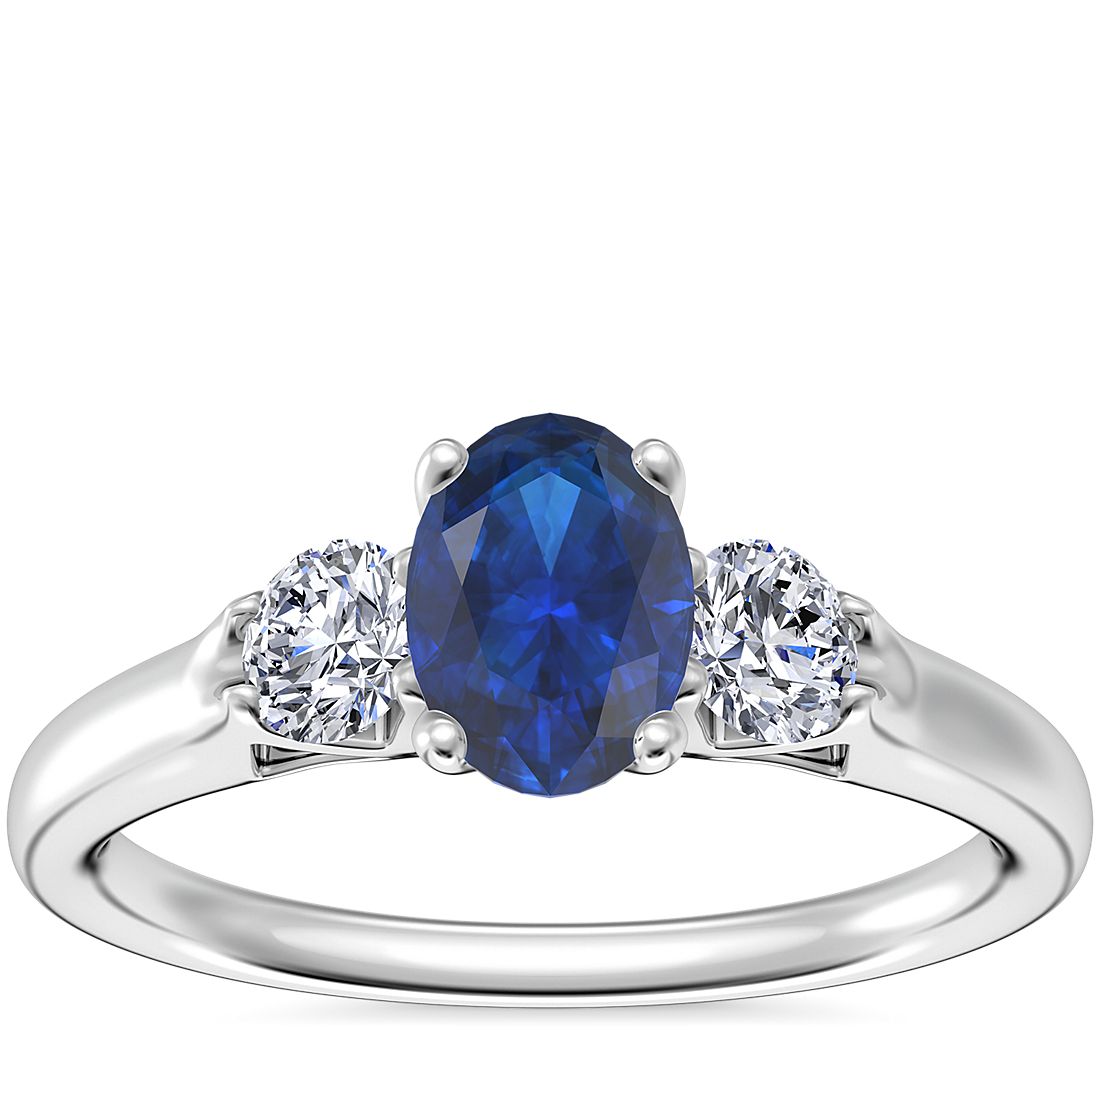 Classic Three Stone Engagement Ring with Oval Sapphire in 14k White Gold (7x5mm)